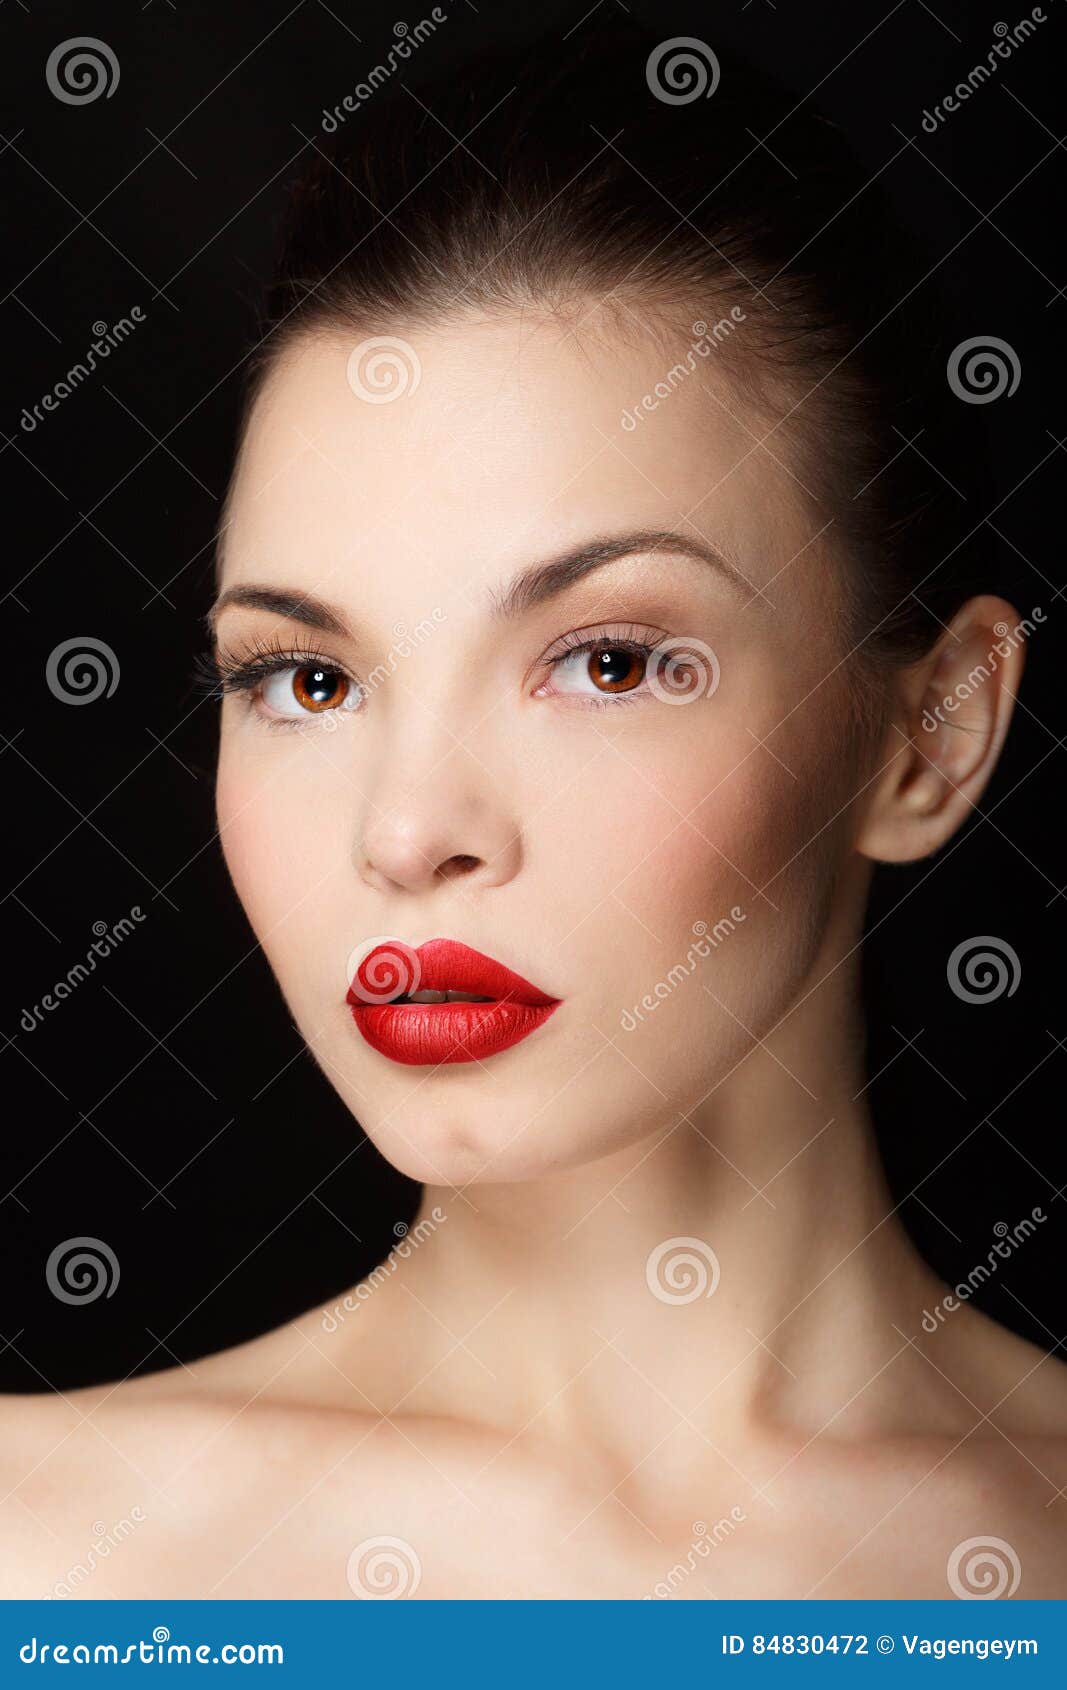 Natural Beauty Women Portrait With Red Lips Stock Image 